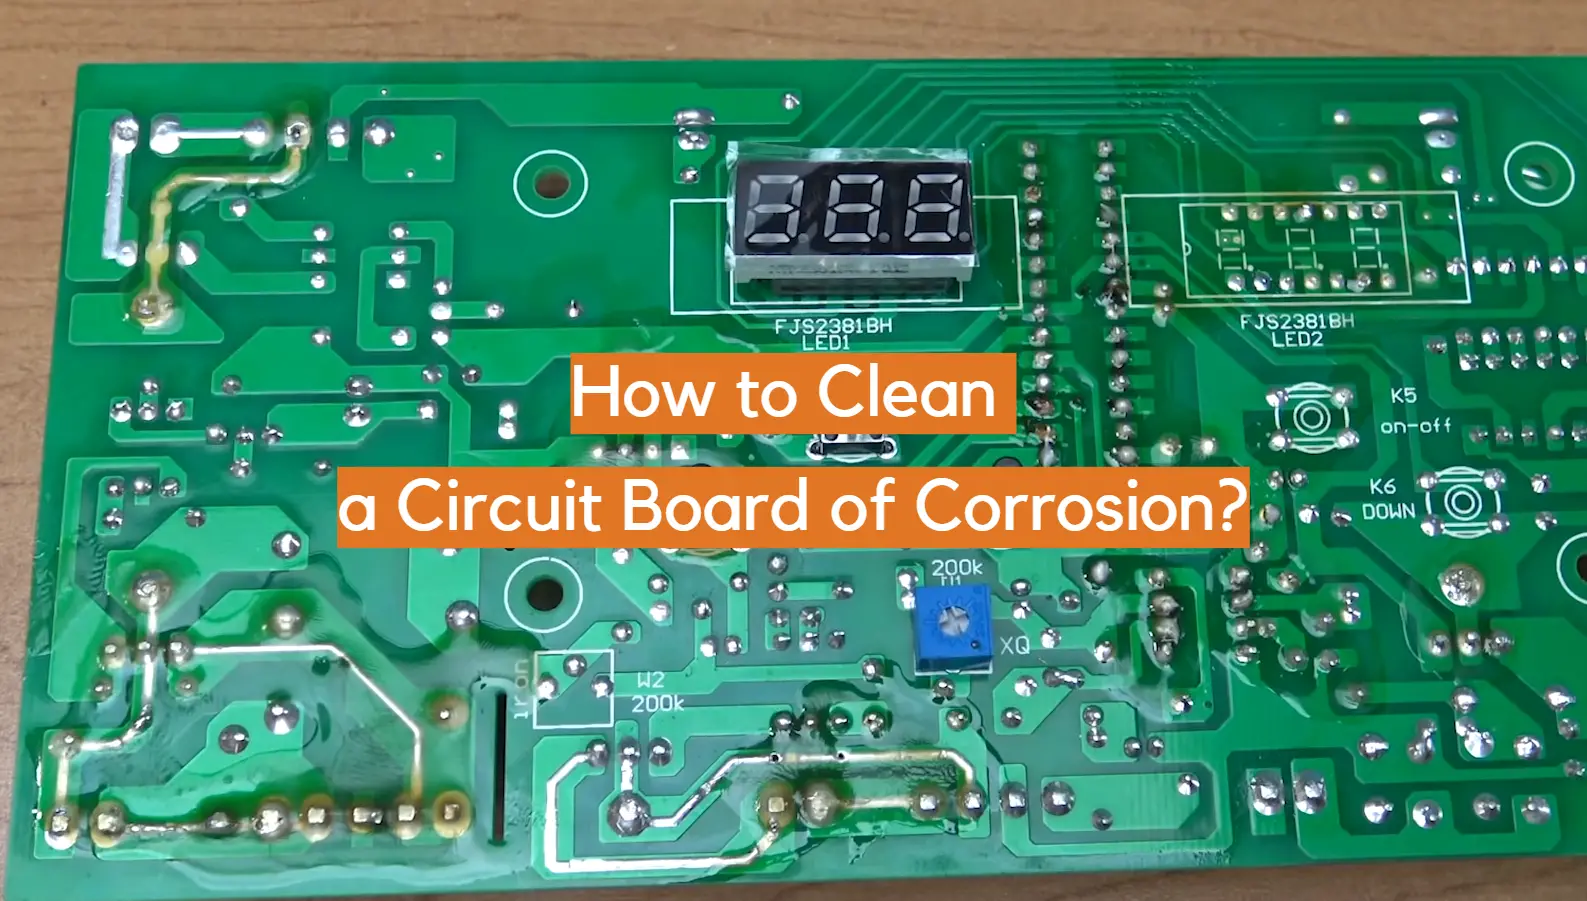 How to Clean a Circuit Board of Corrosion?